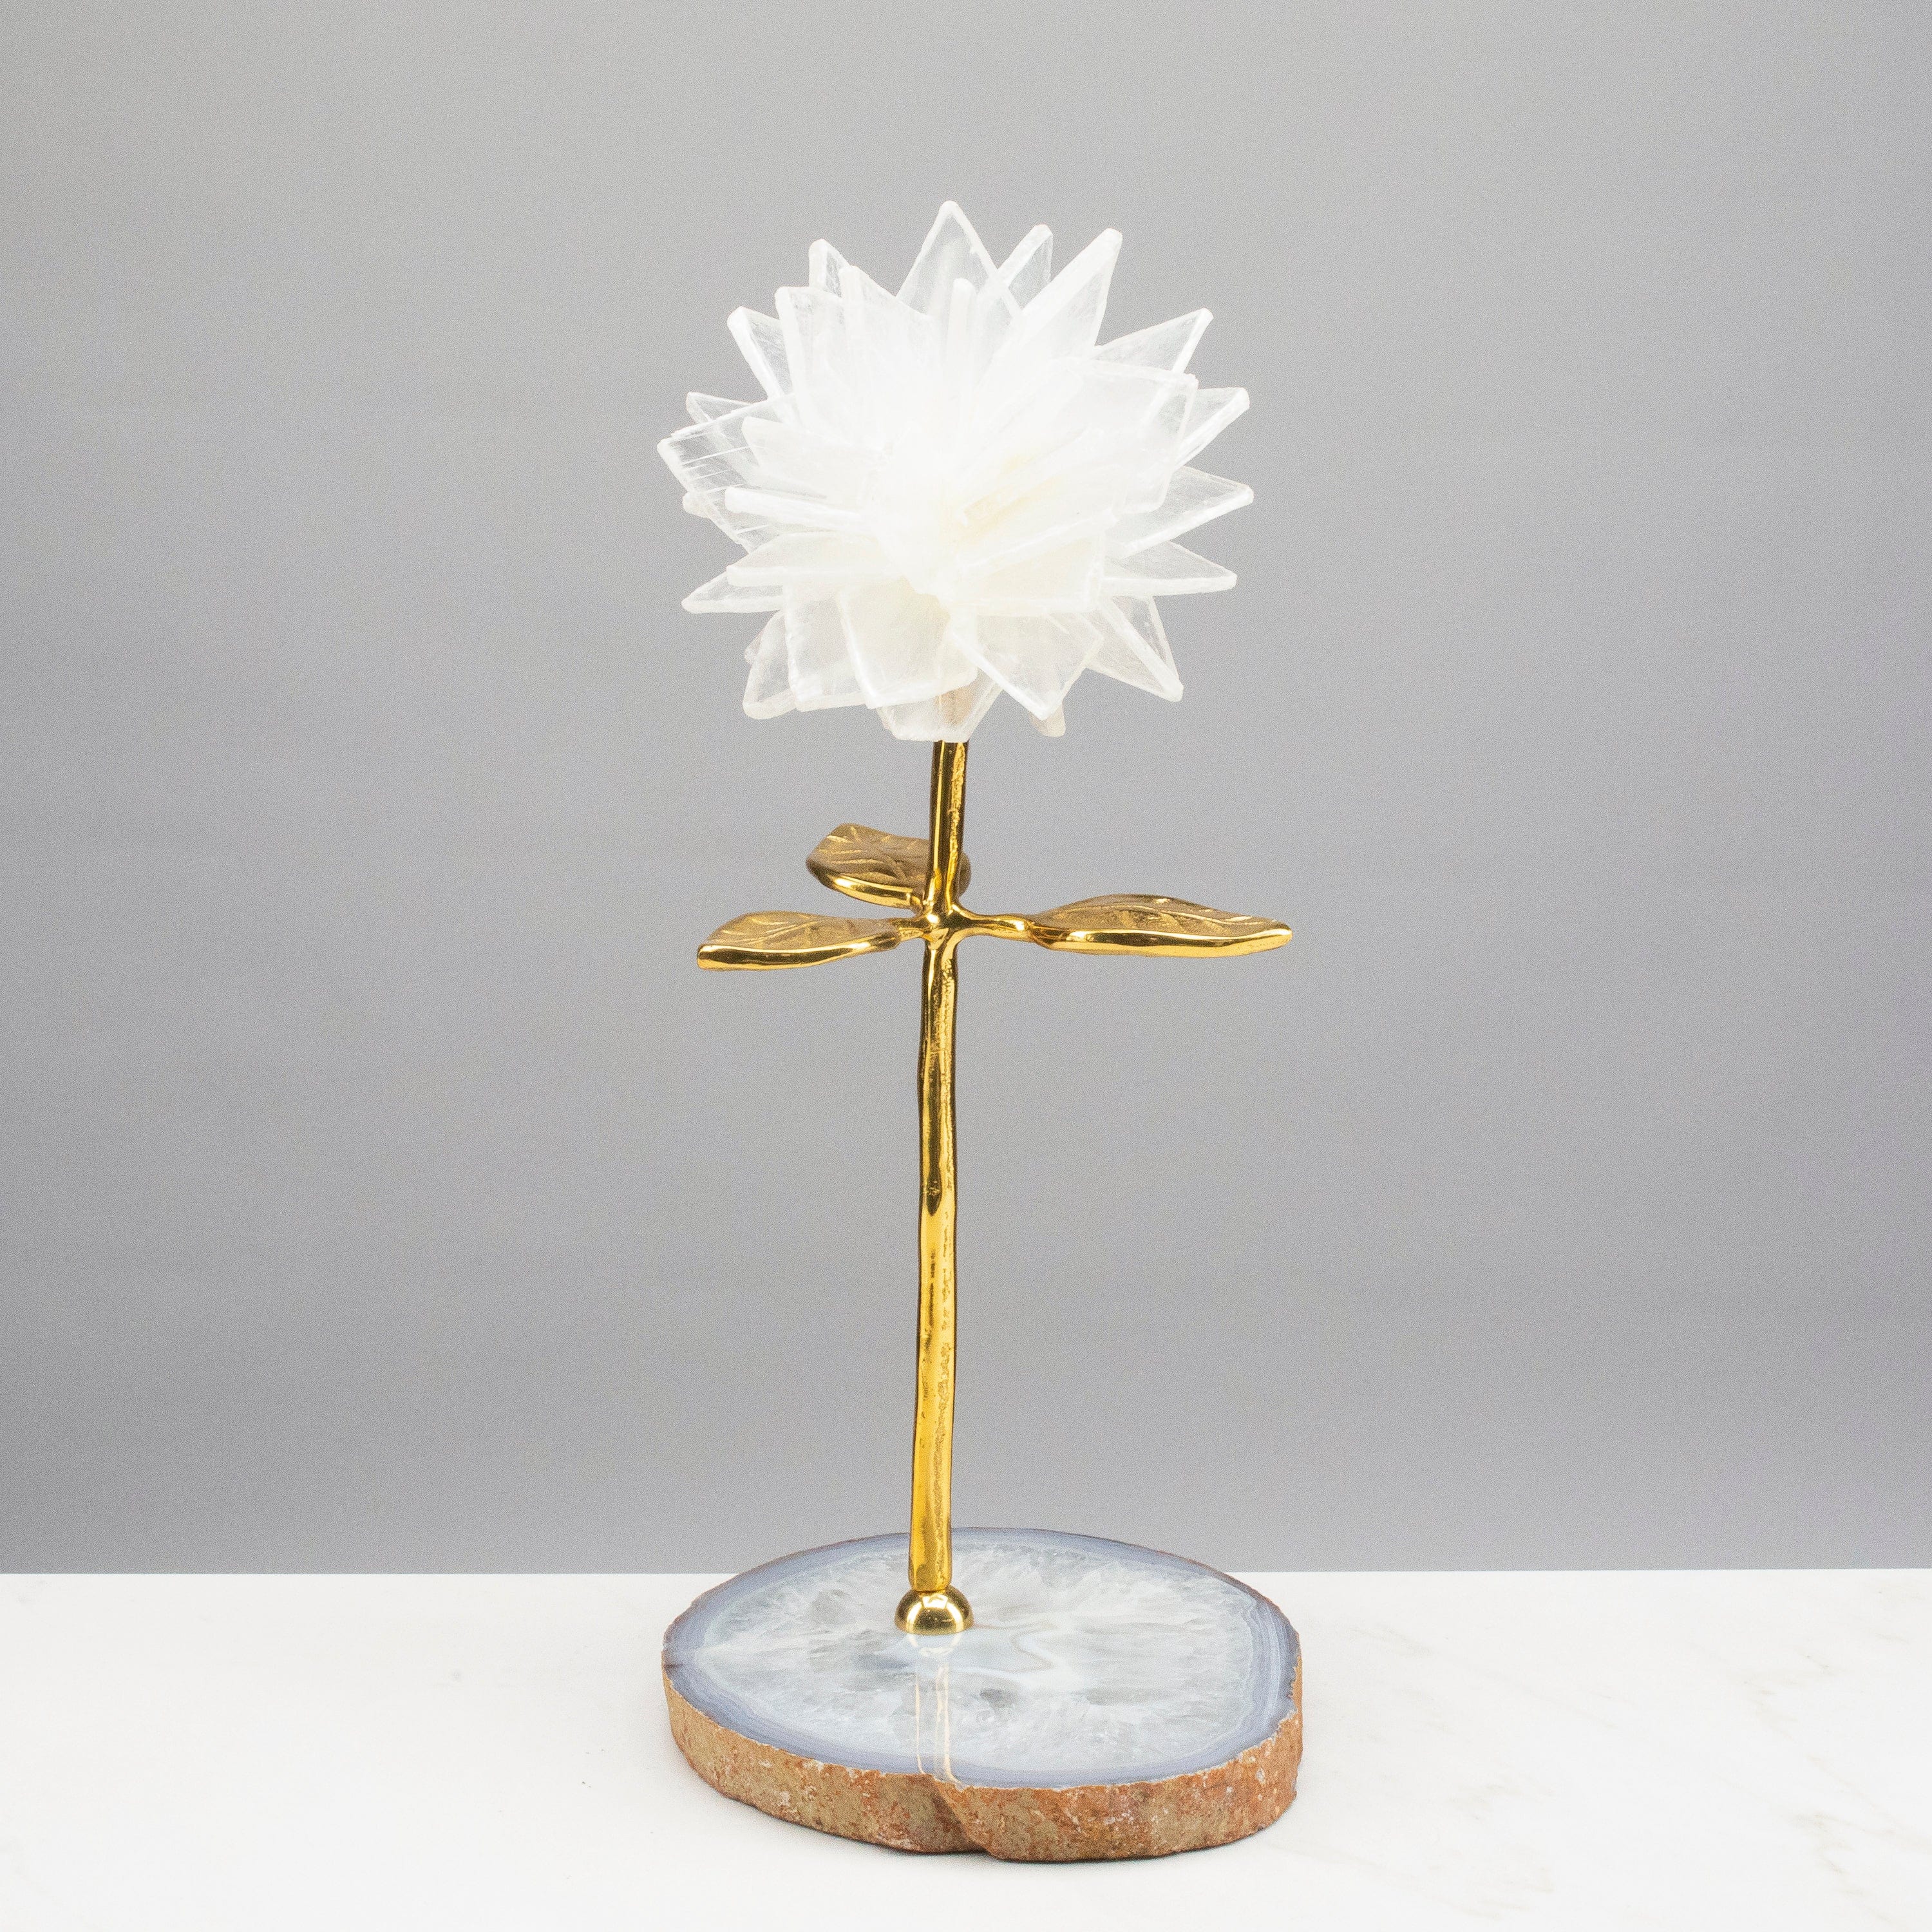 KALIFANO Crystal Home Decor Calcite Flower with Brass Stem on Agate Base HG638B-SL